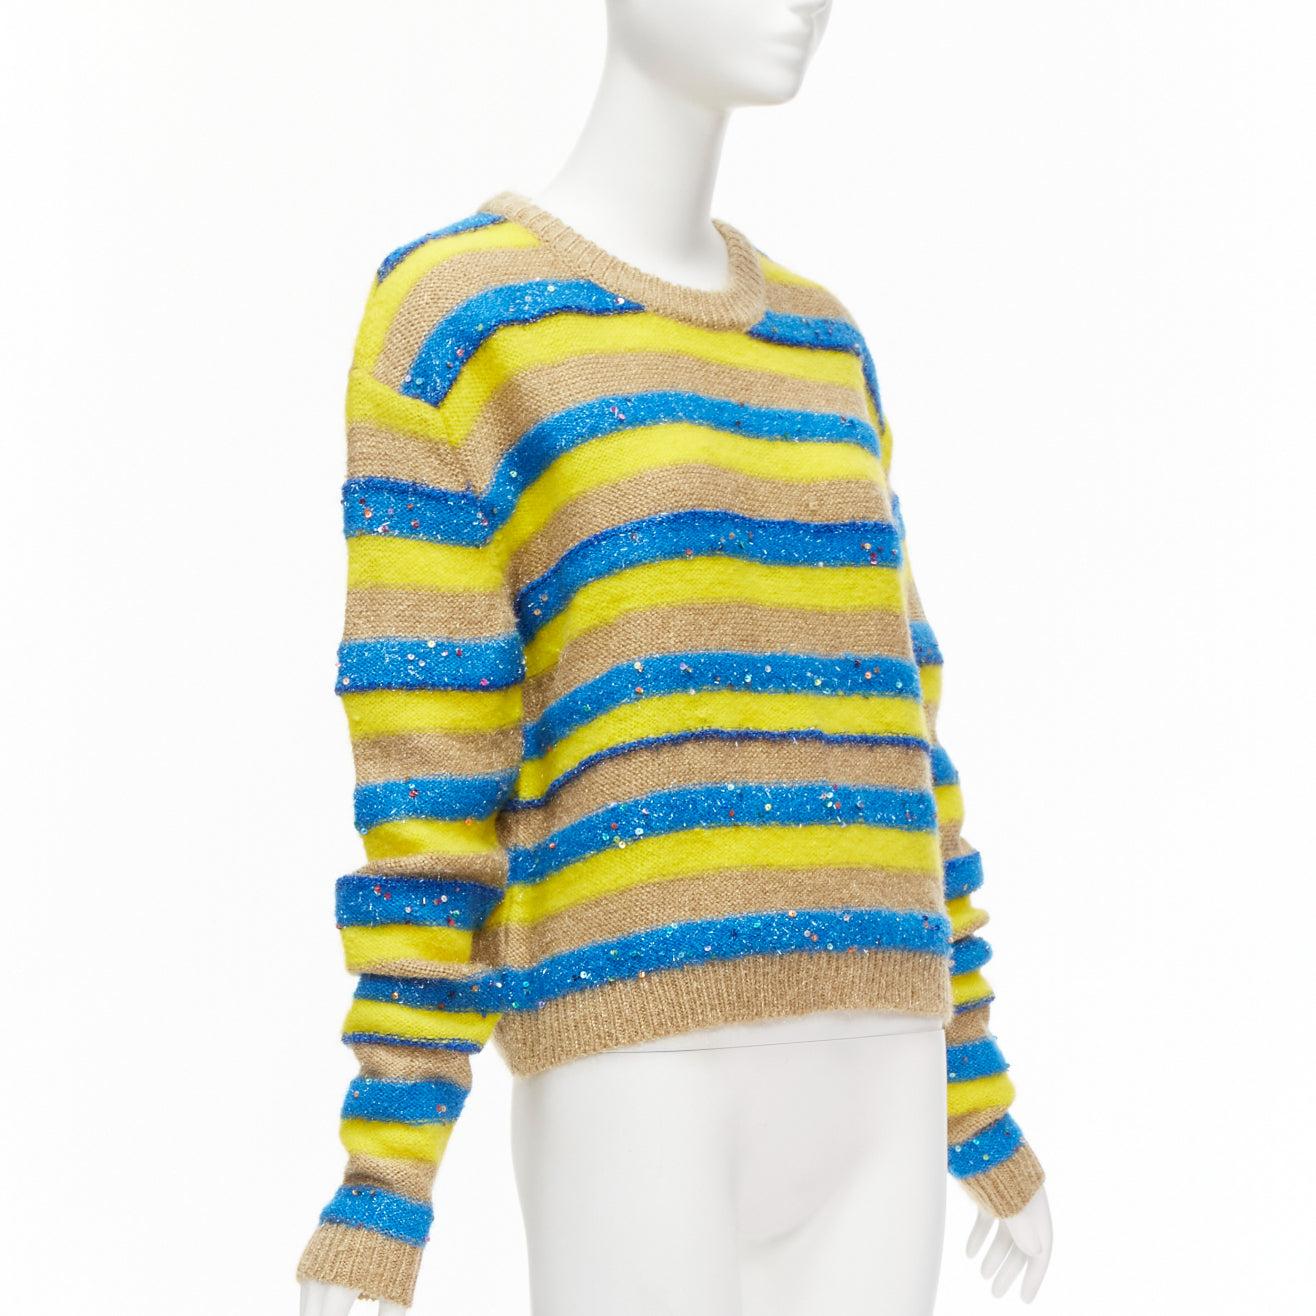 ASHISH brown yellow blue striped mixed sequins lurex knitted sweater top XS
Reference: AAWC/A00653
Brand: Ashish
Material: Mohair, Nylon, Acrylic
Color: Yellow, Blue
Pattern: Pinstriped
Extra Details: Crew neck. Mixed sequins on blue lurex stripes.